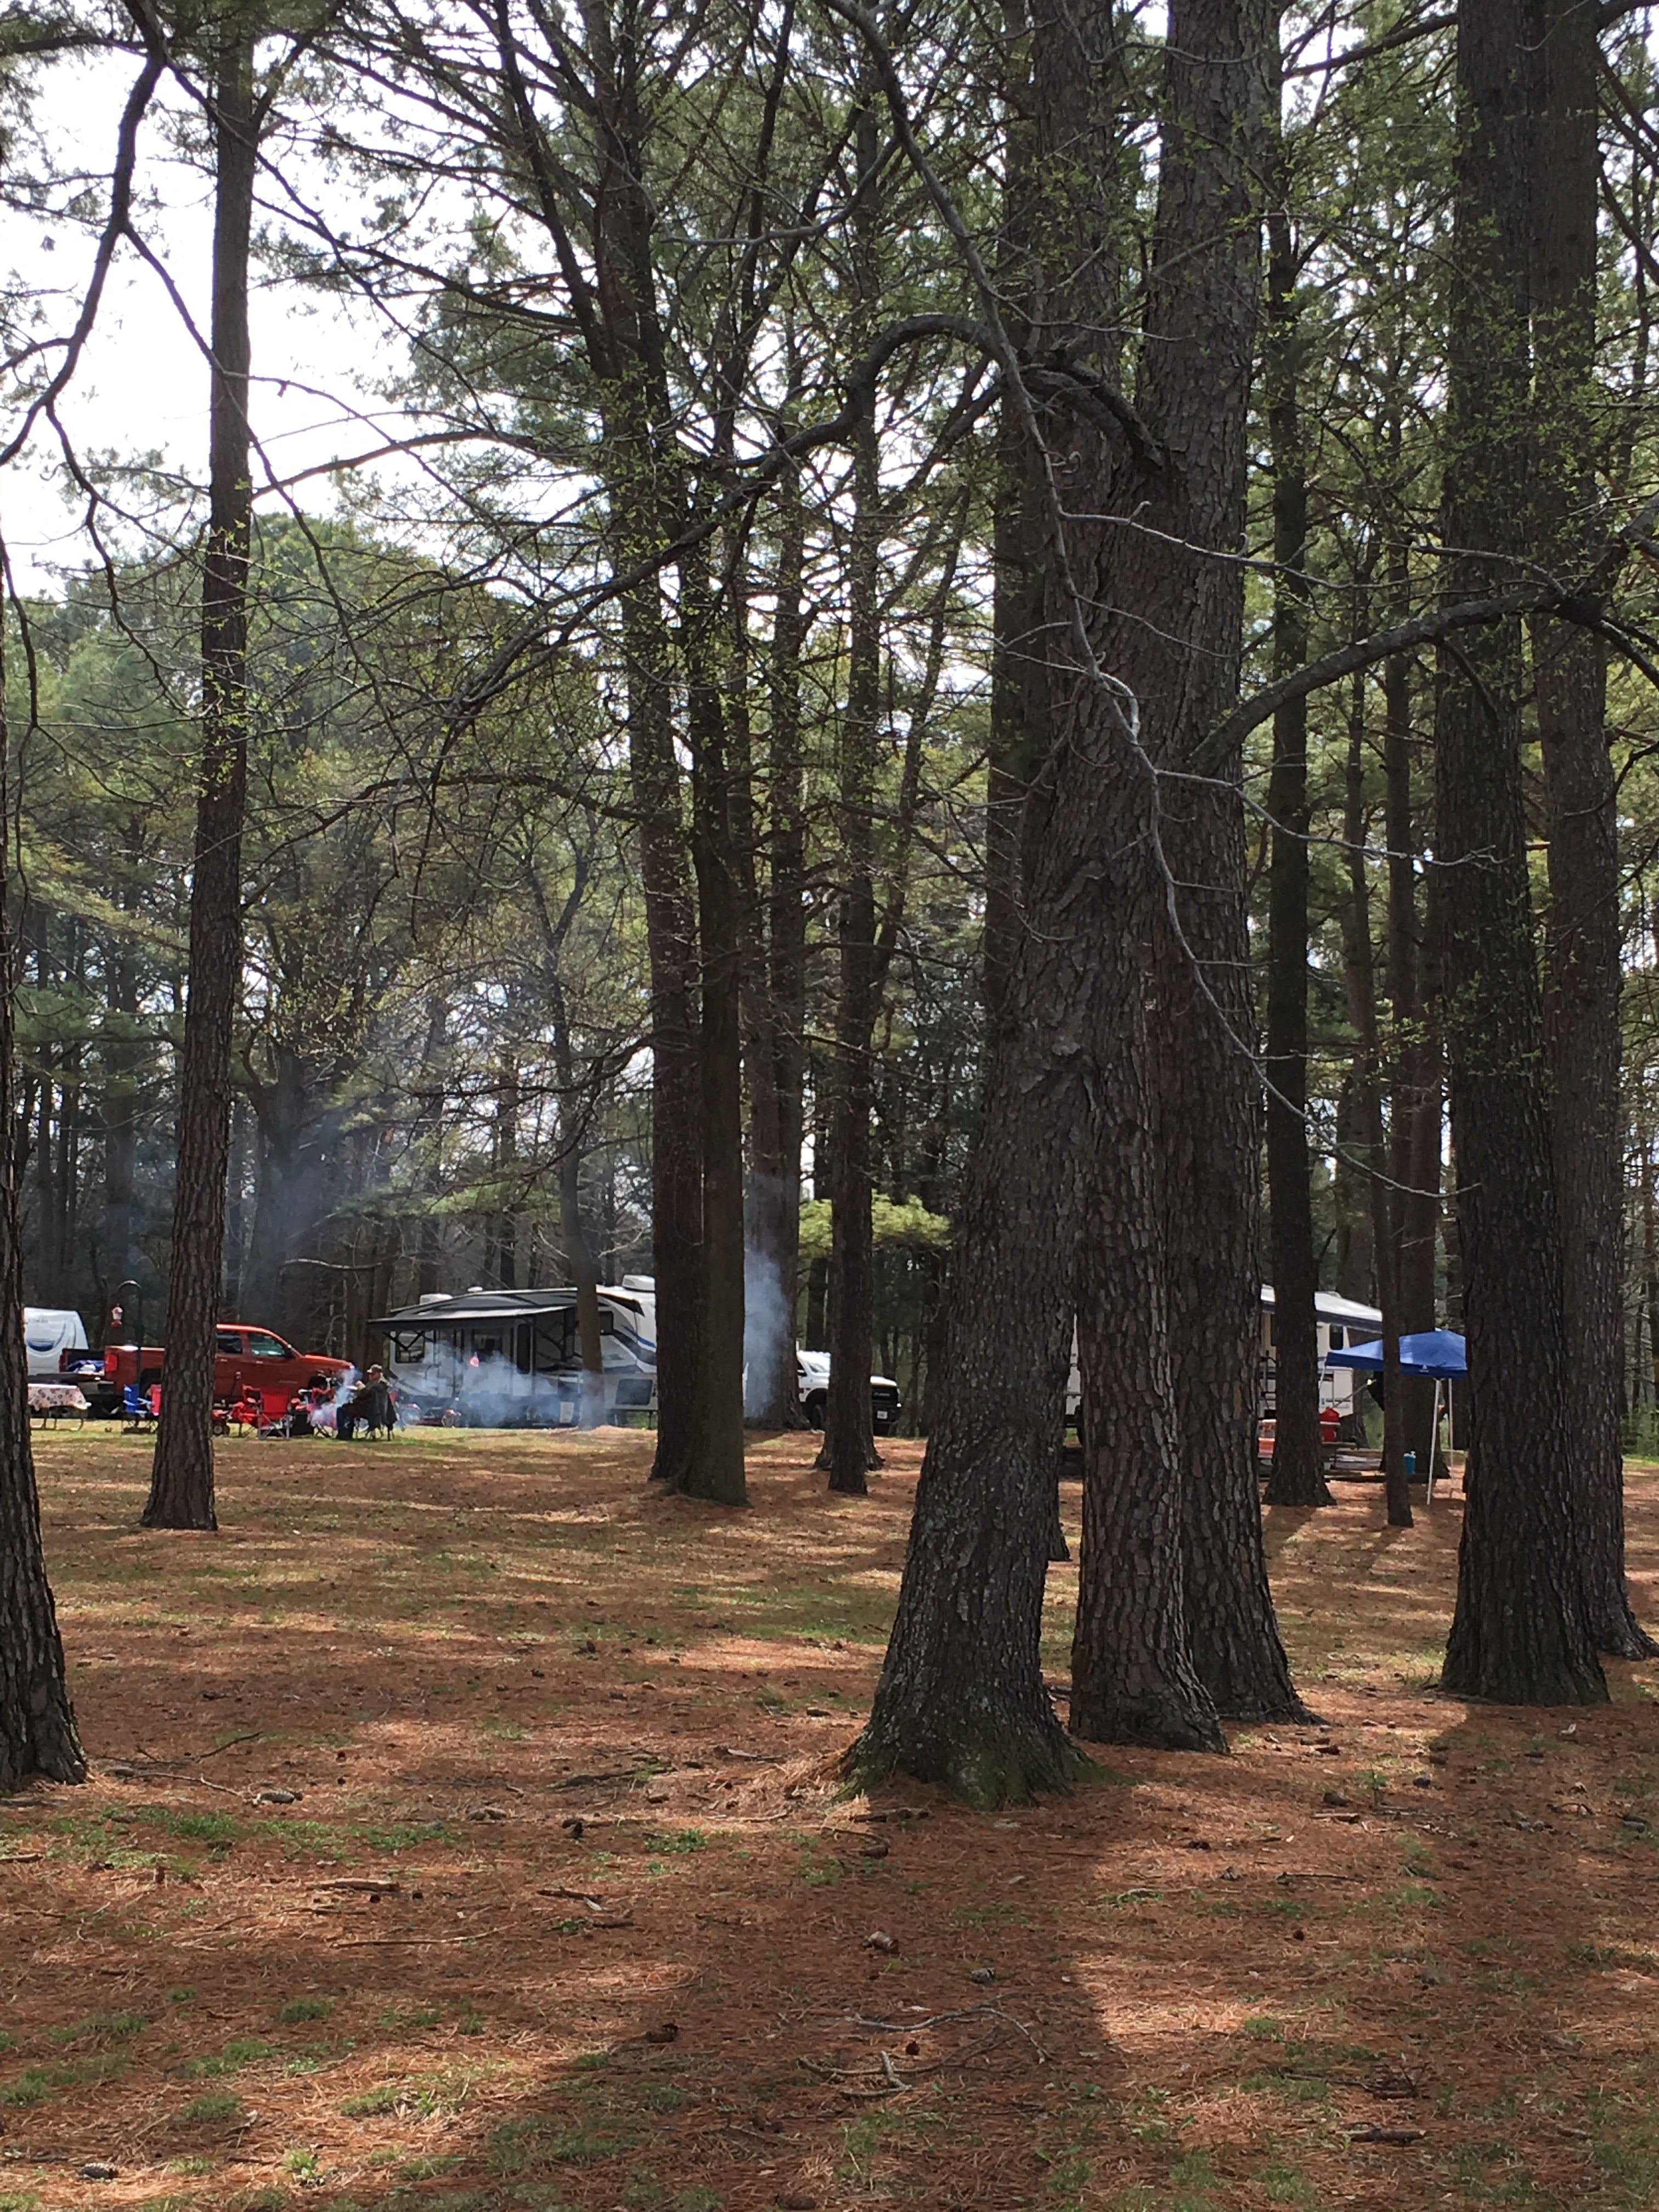 A friendly neighbor's campsite on the next loop over had lots of hammock trees